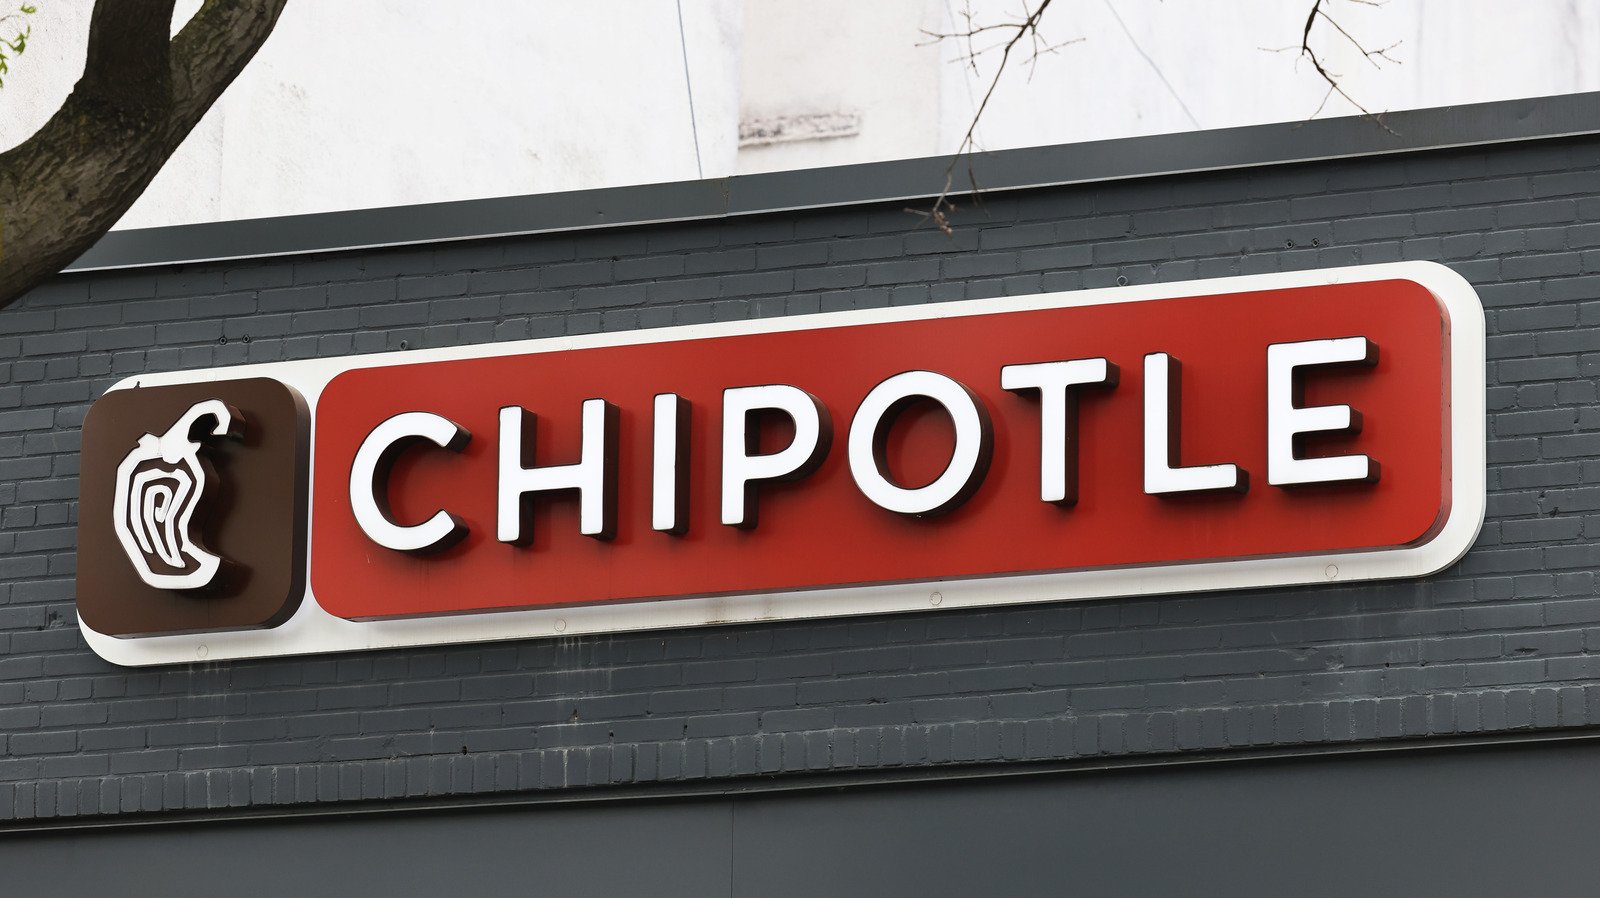 The Real Reason People Are Upset About Chipotle's Price Increase - Mashed